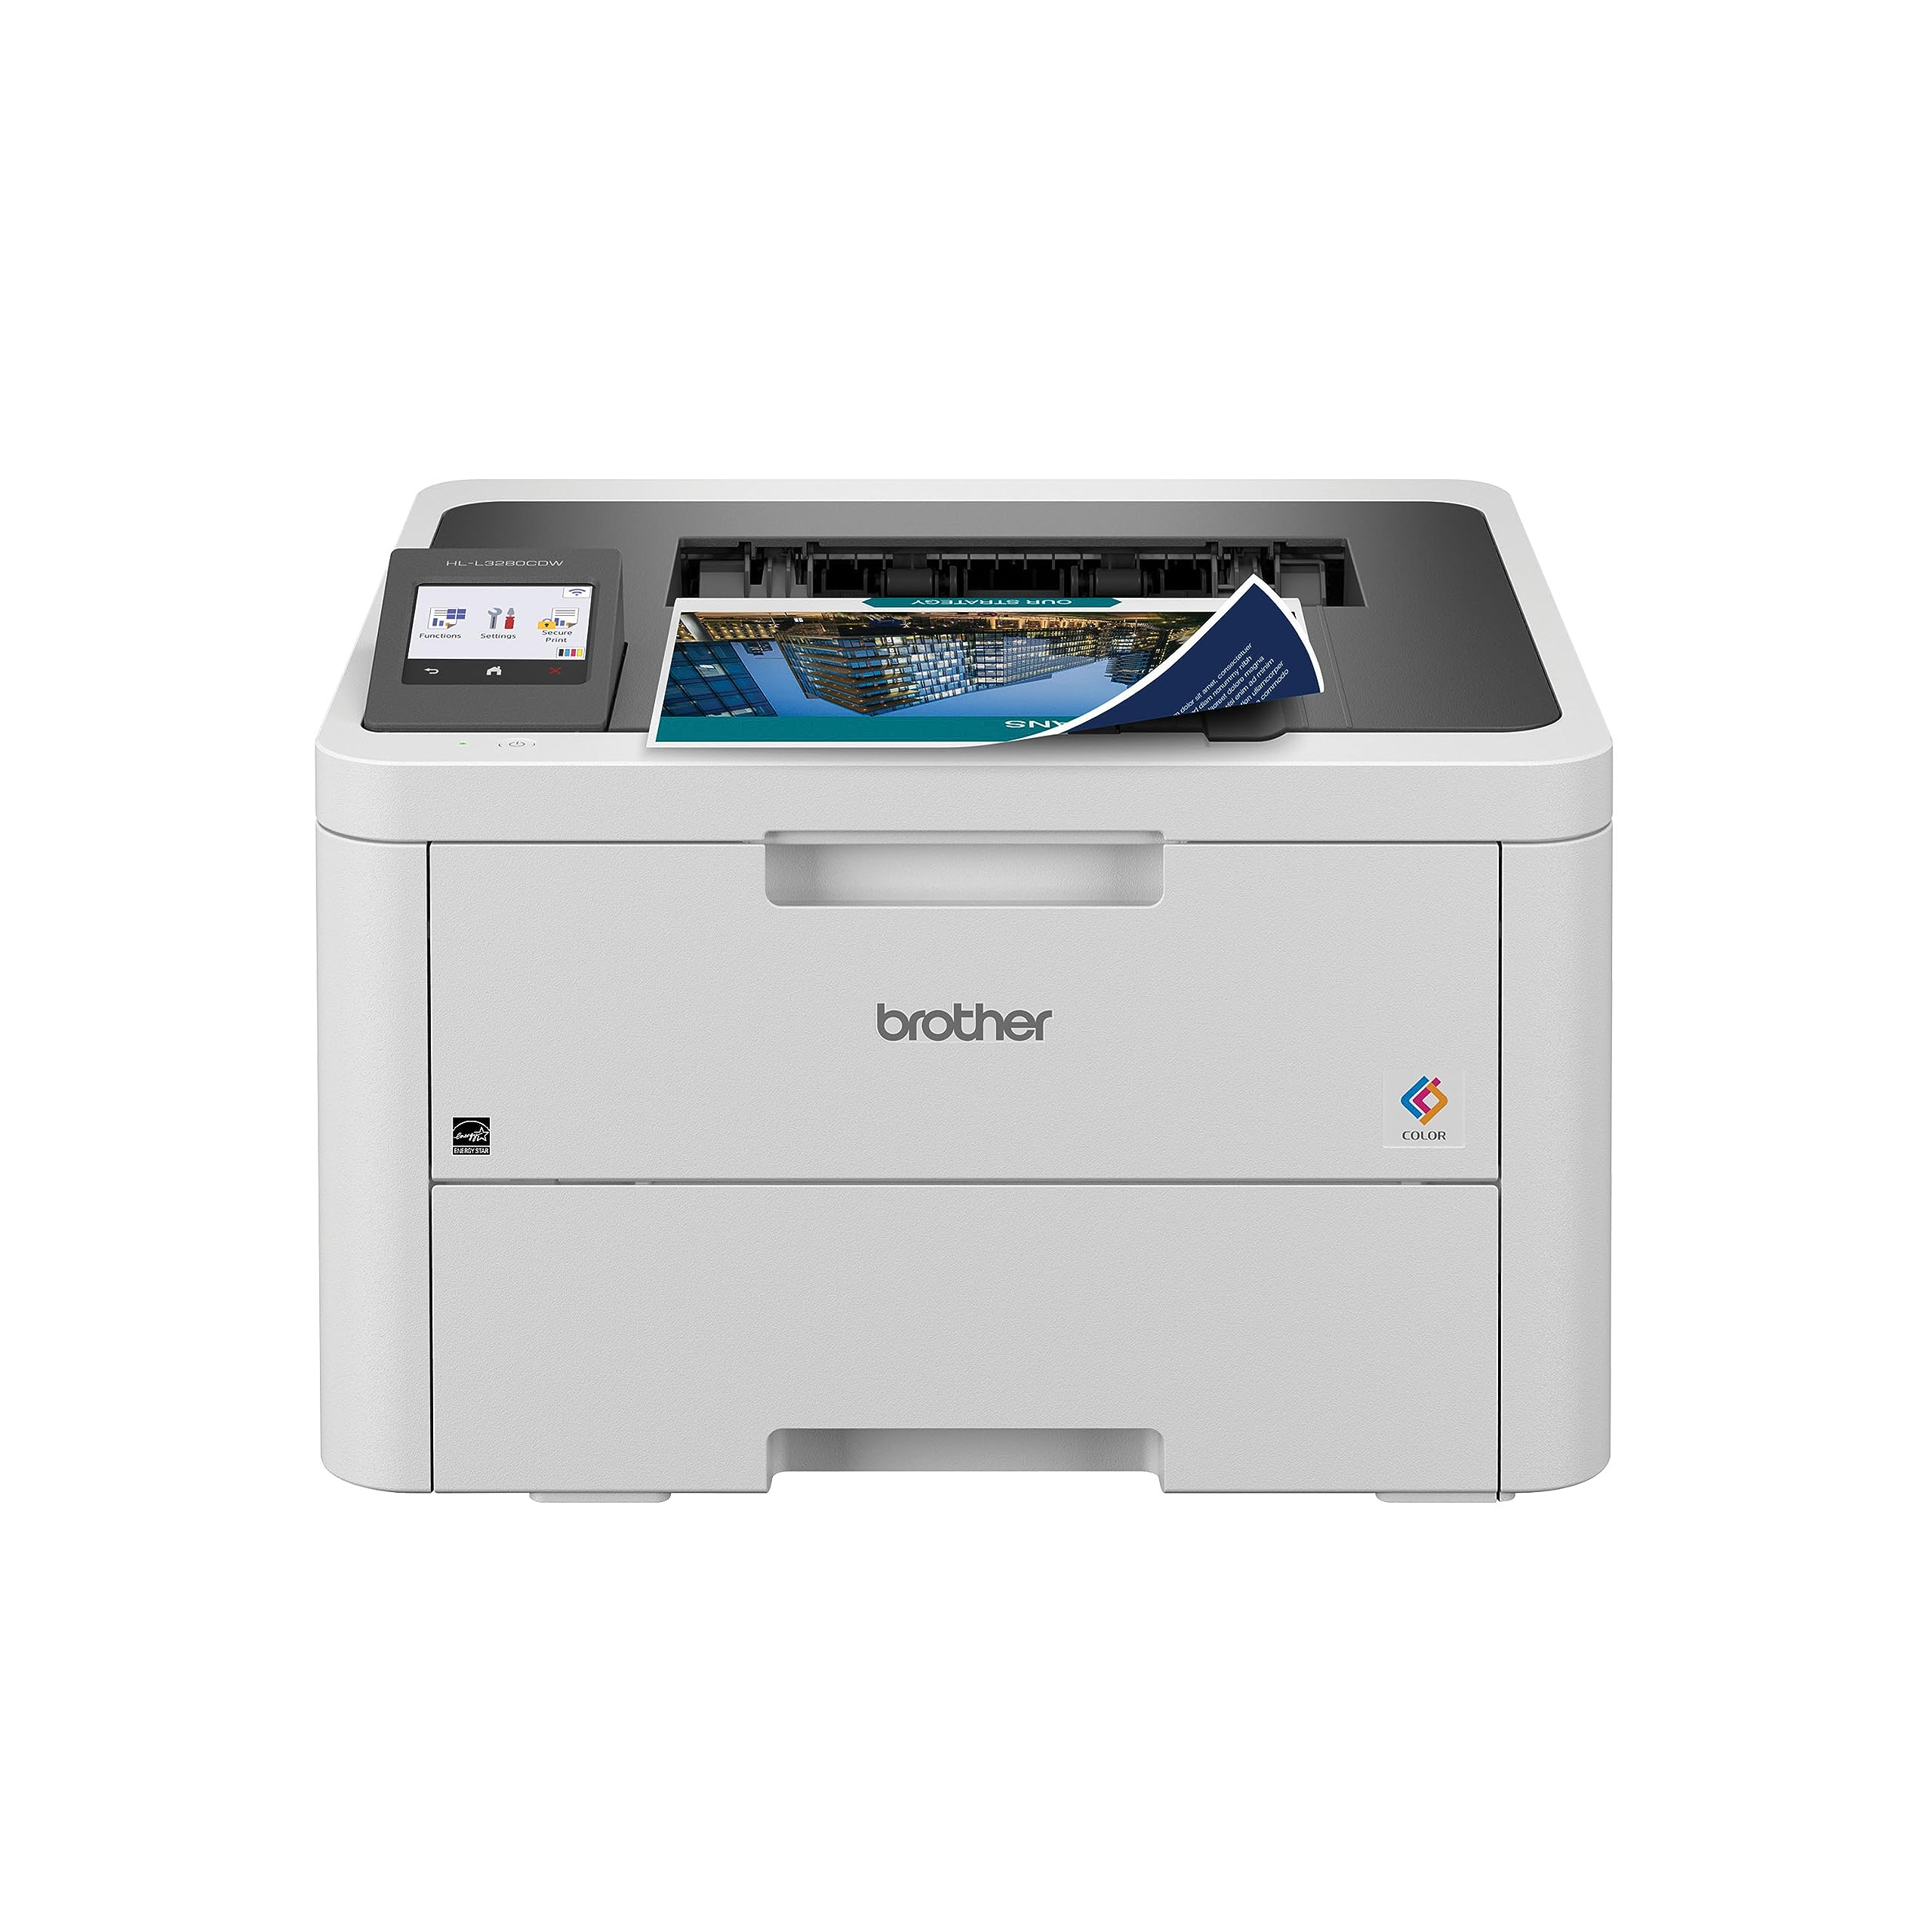 Brother HL-L3280CDW Wireless Compact Digital Color Printer with Laser Quality Output, Duplex, Mobile Printing & Ethernet | Includes 4 Month Refresh Subscription Trial¹, Amazon Dash Replenishment Ready